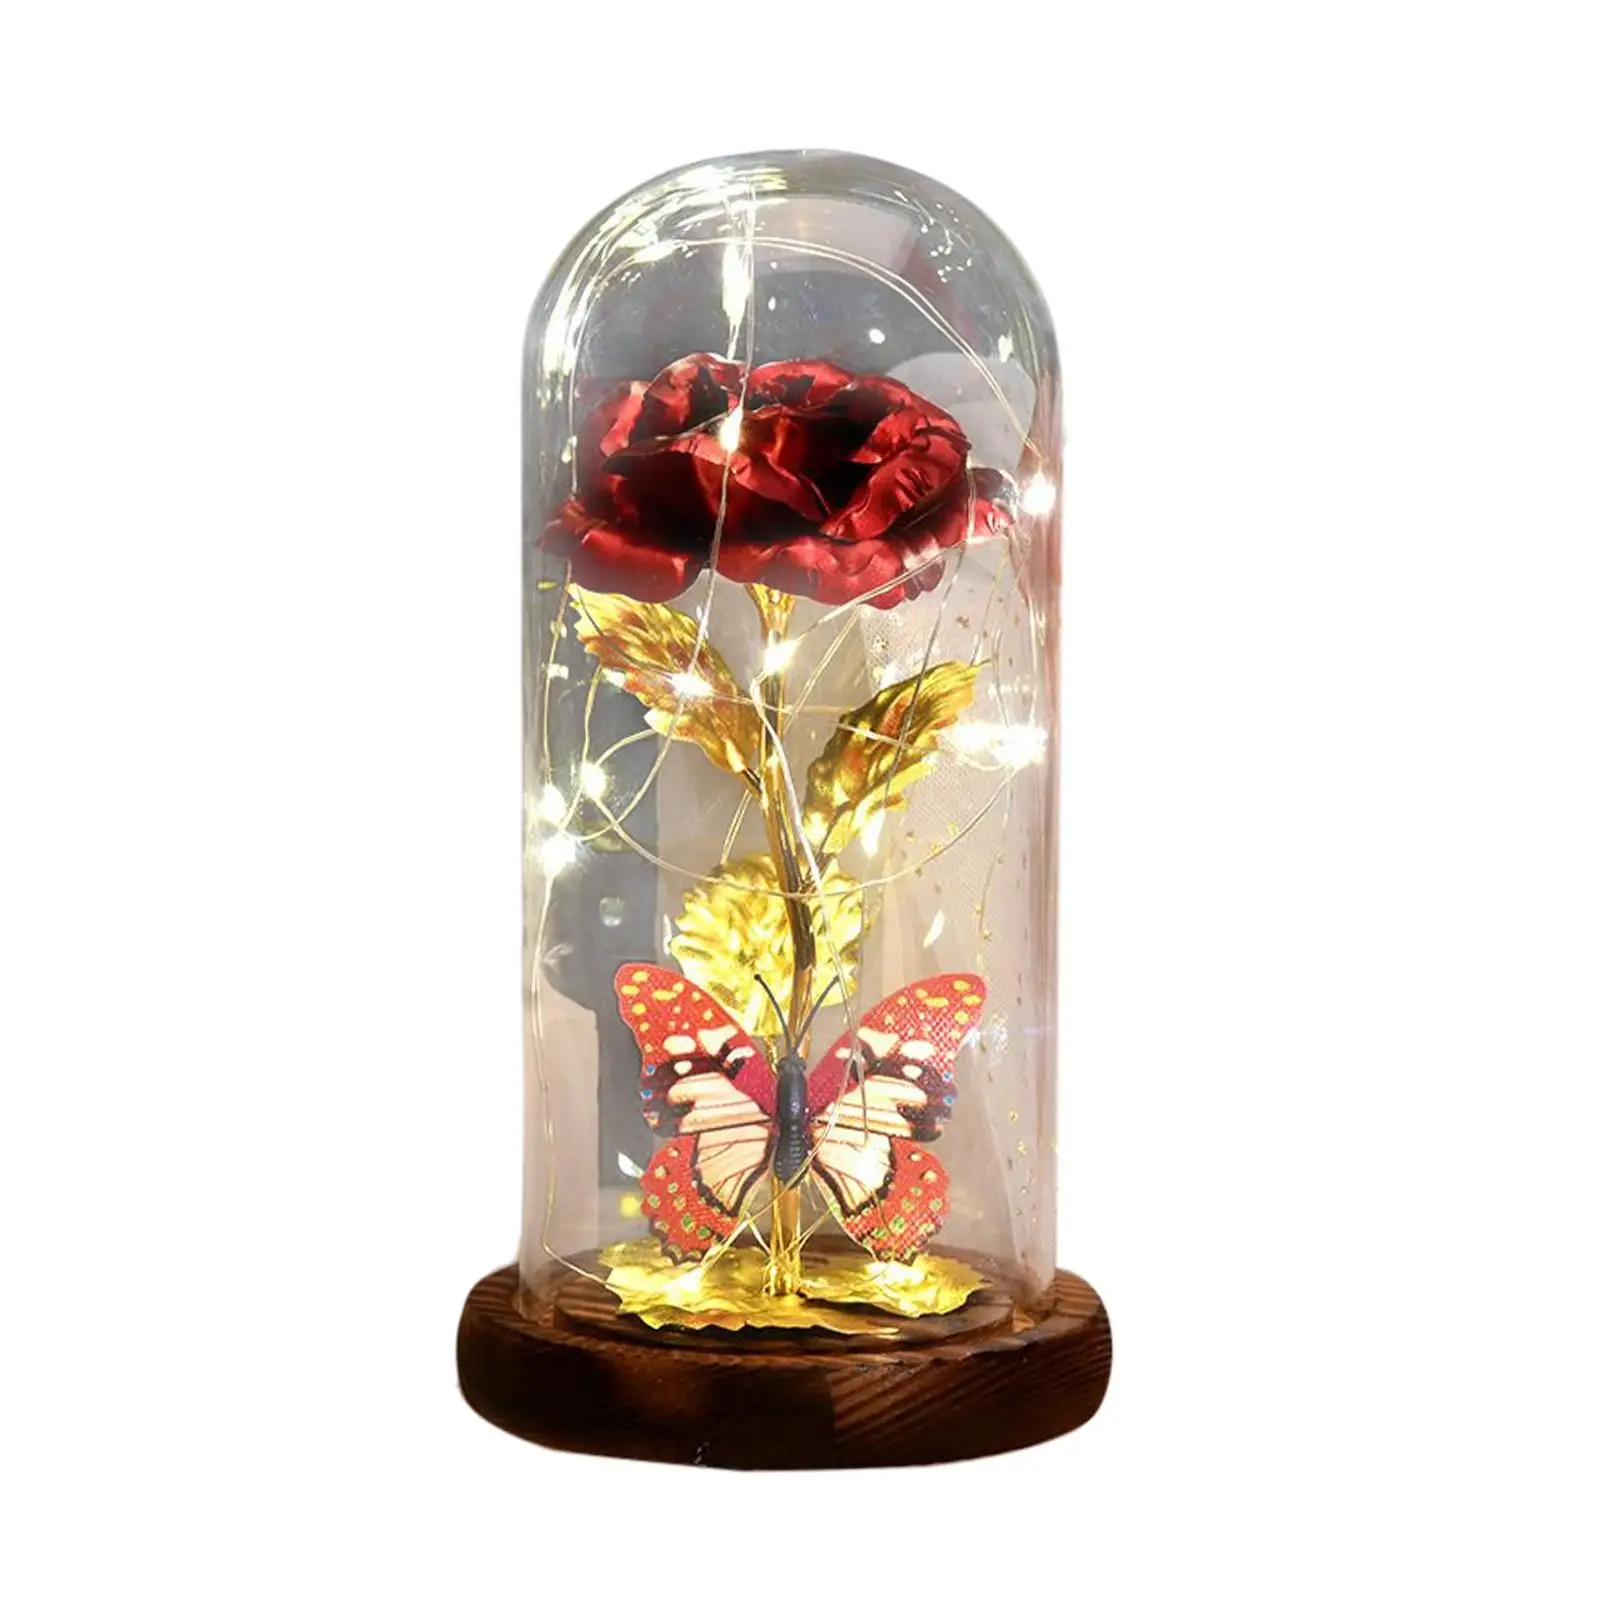 Rose Flower Ornaments Clear Glass Cover Atmosphere Lamp LED Night Light for Bedroom Wedding Table Home Decorations